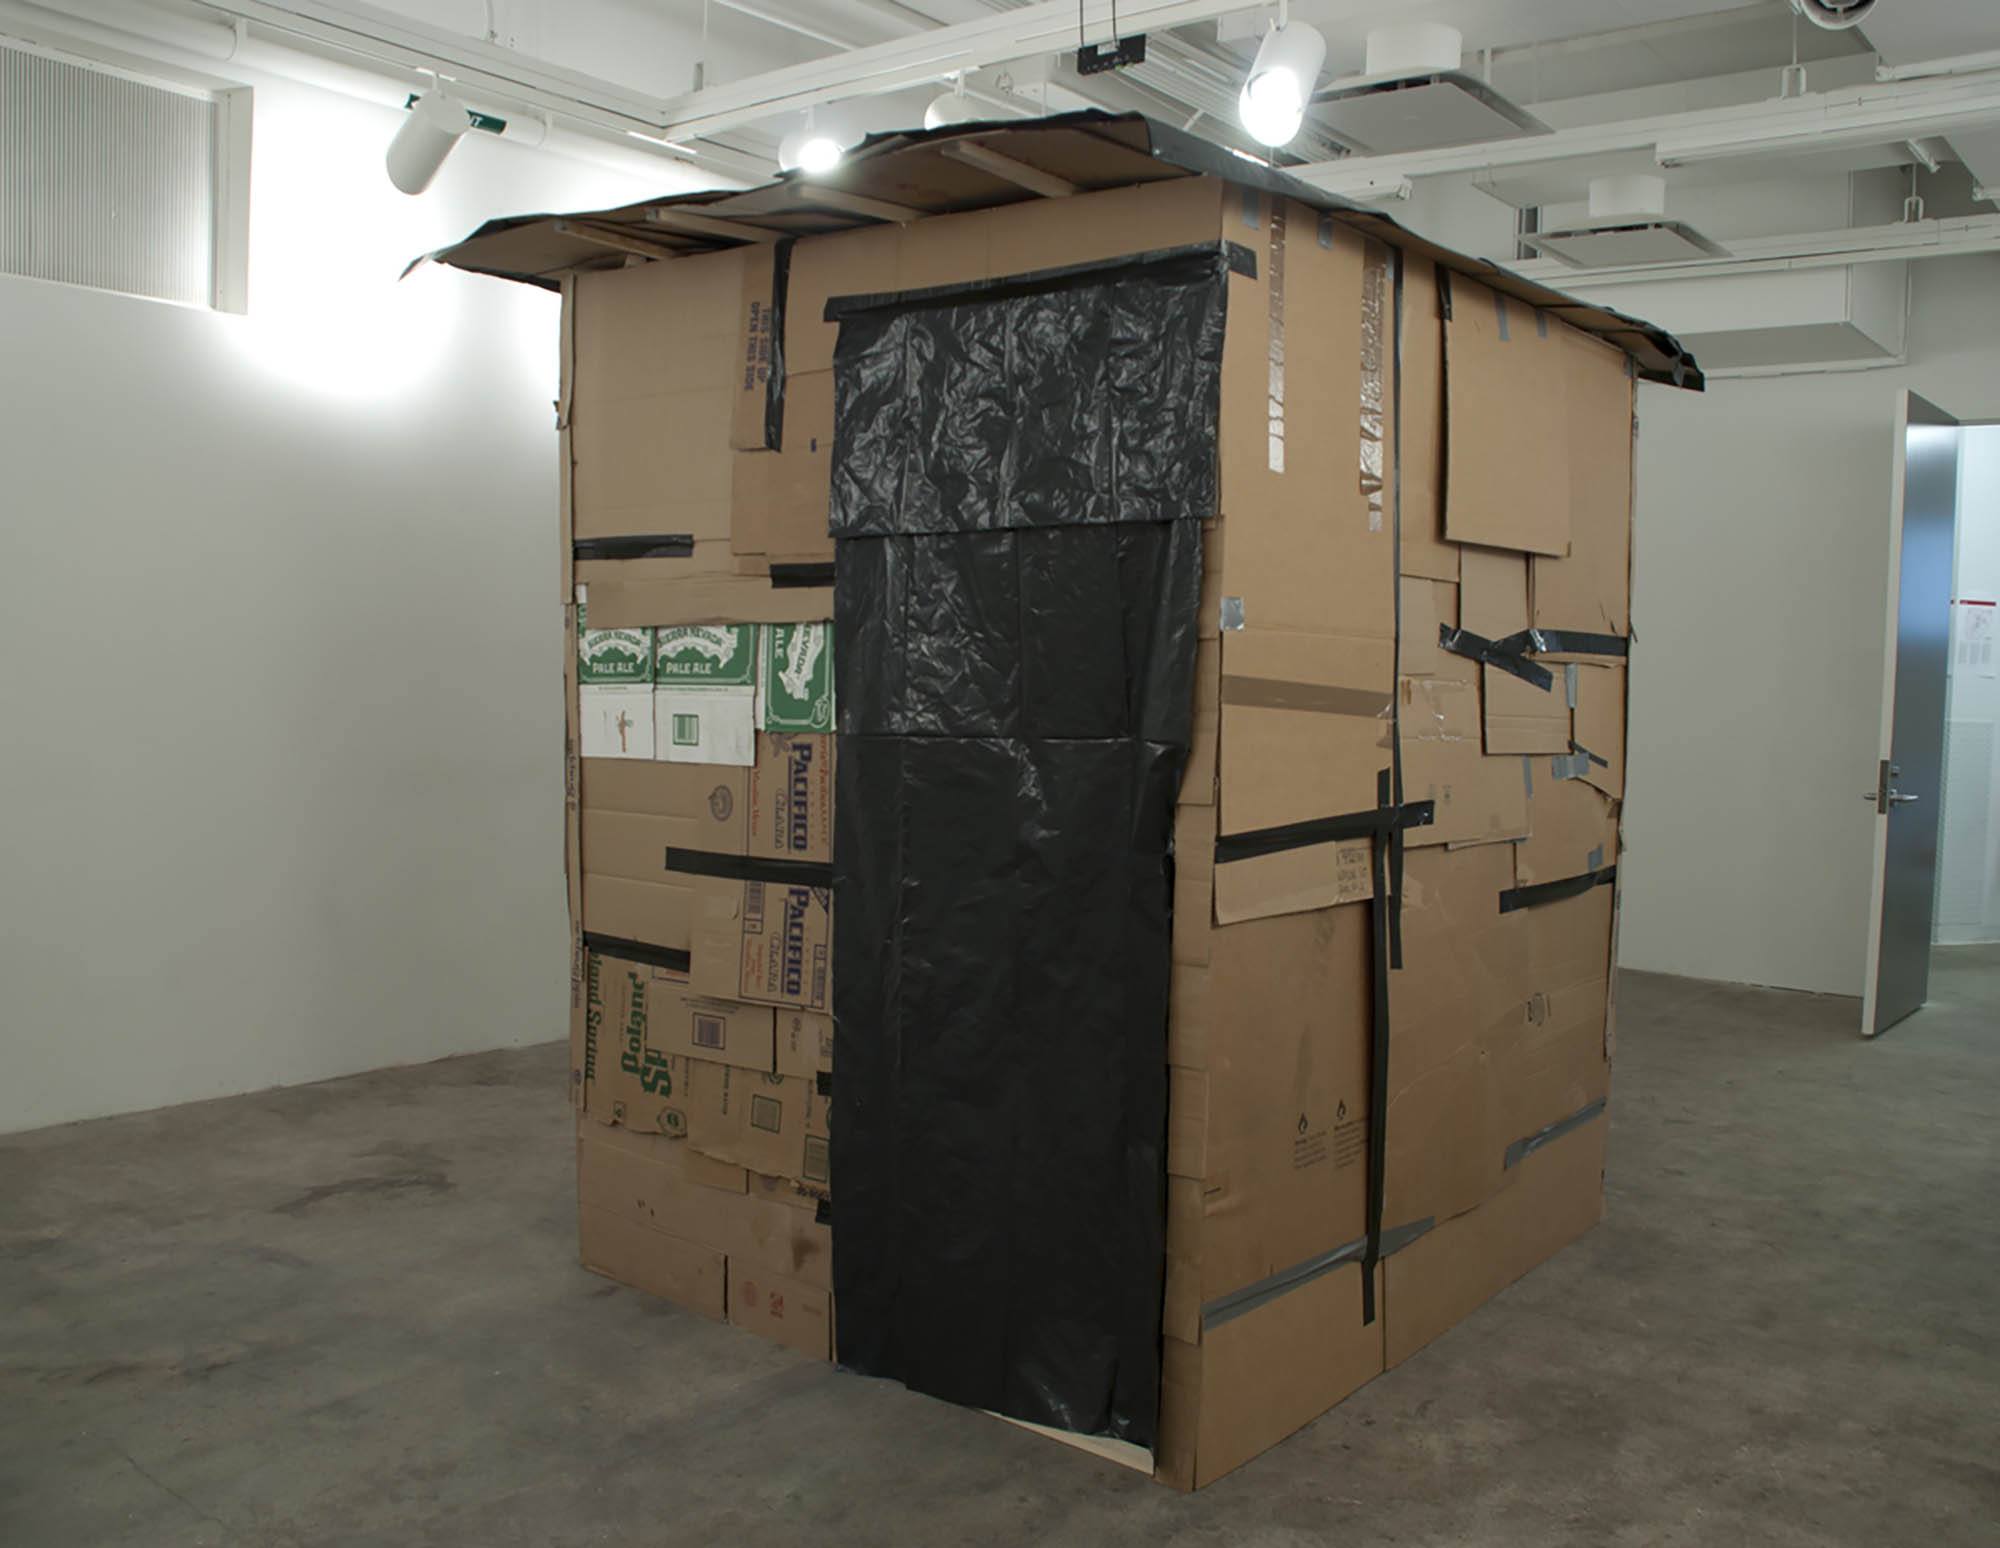 A shelter build out of cardboard inside a gallery